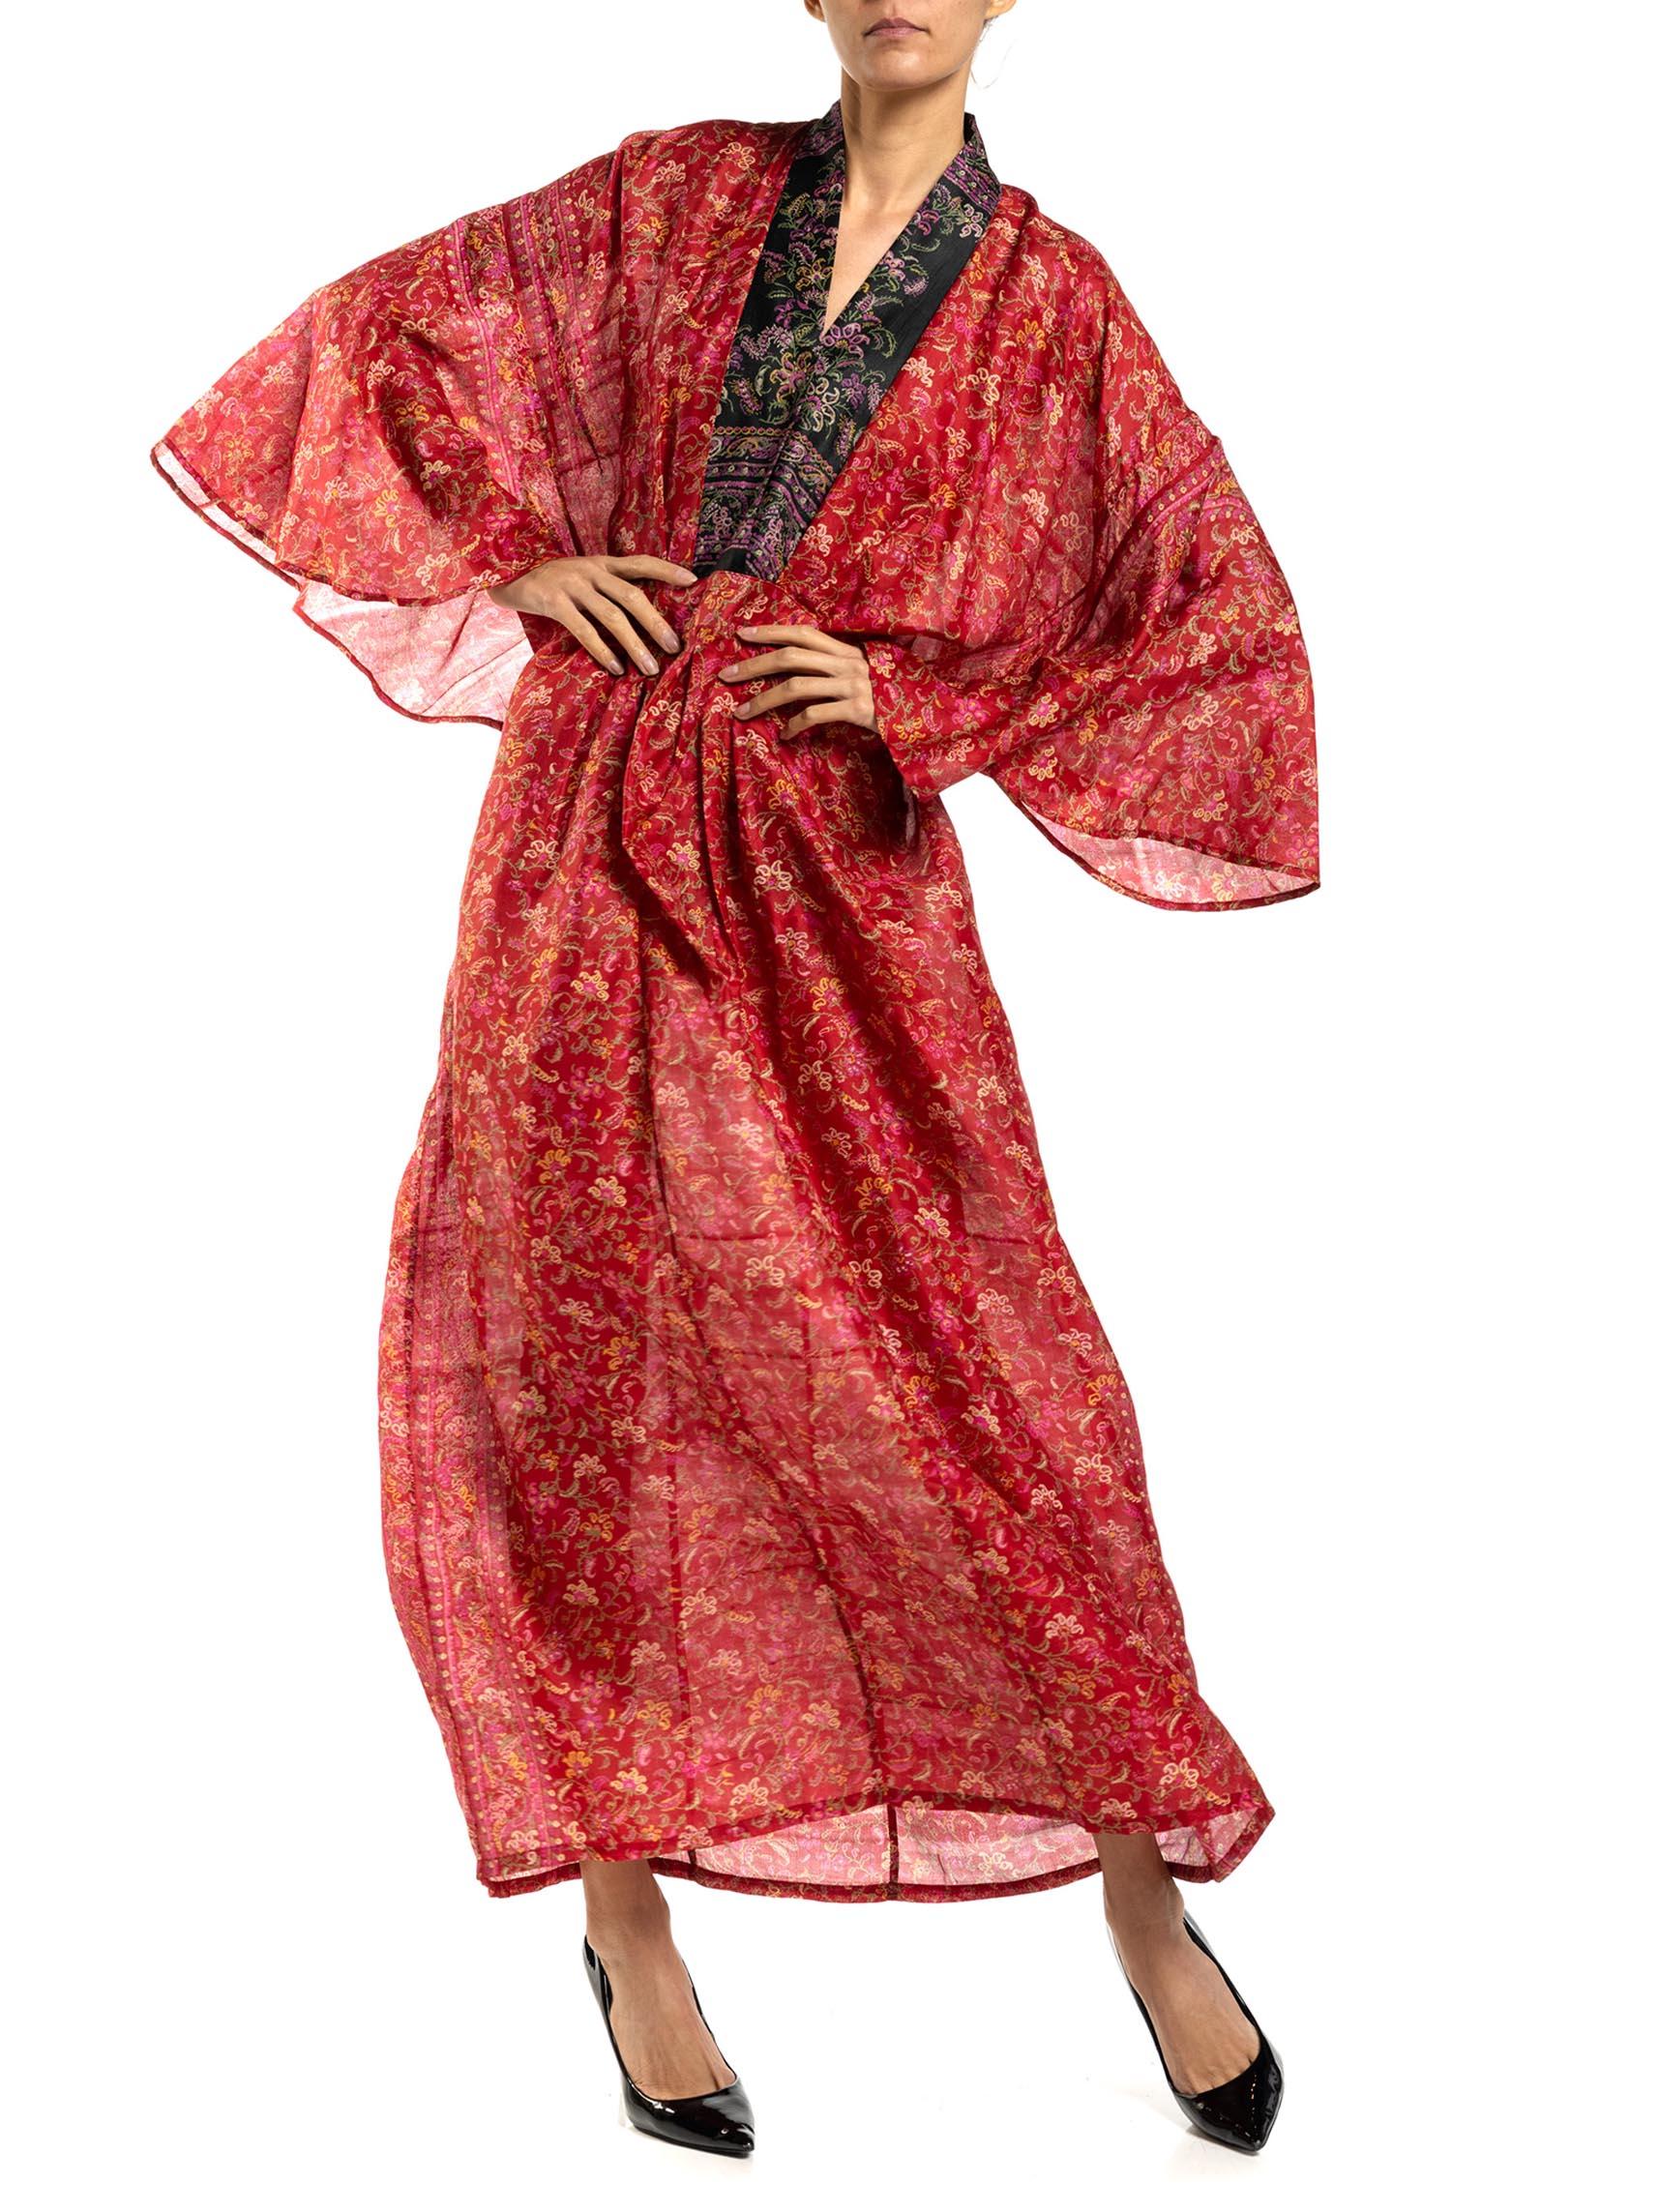 MORPHEW COLLECTION Red & Black Paisley Silk Floral Kaftan Made From Vintage Sari For Sale 4